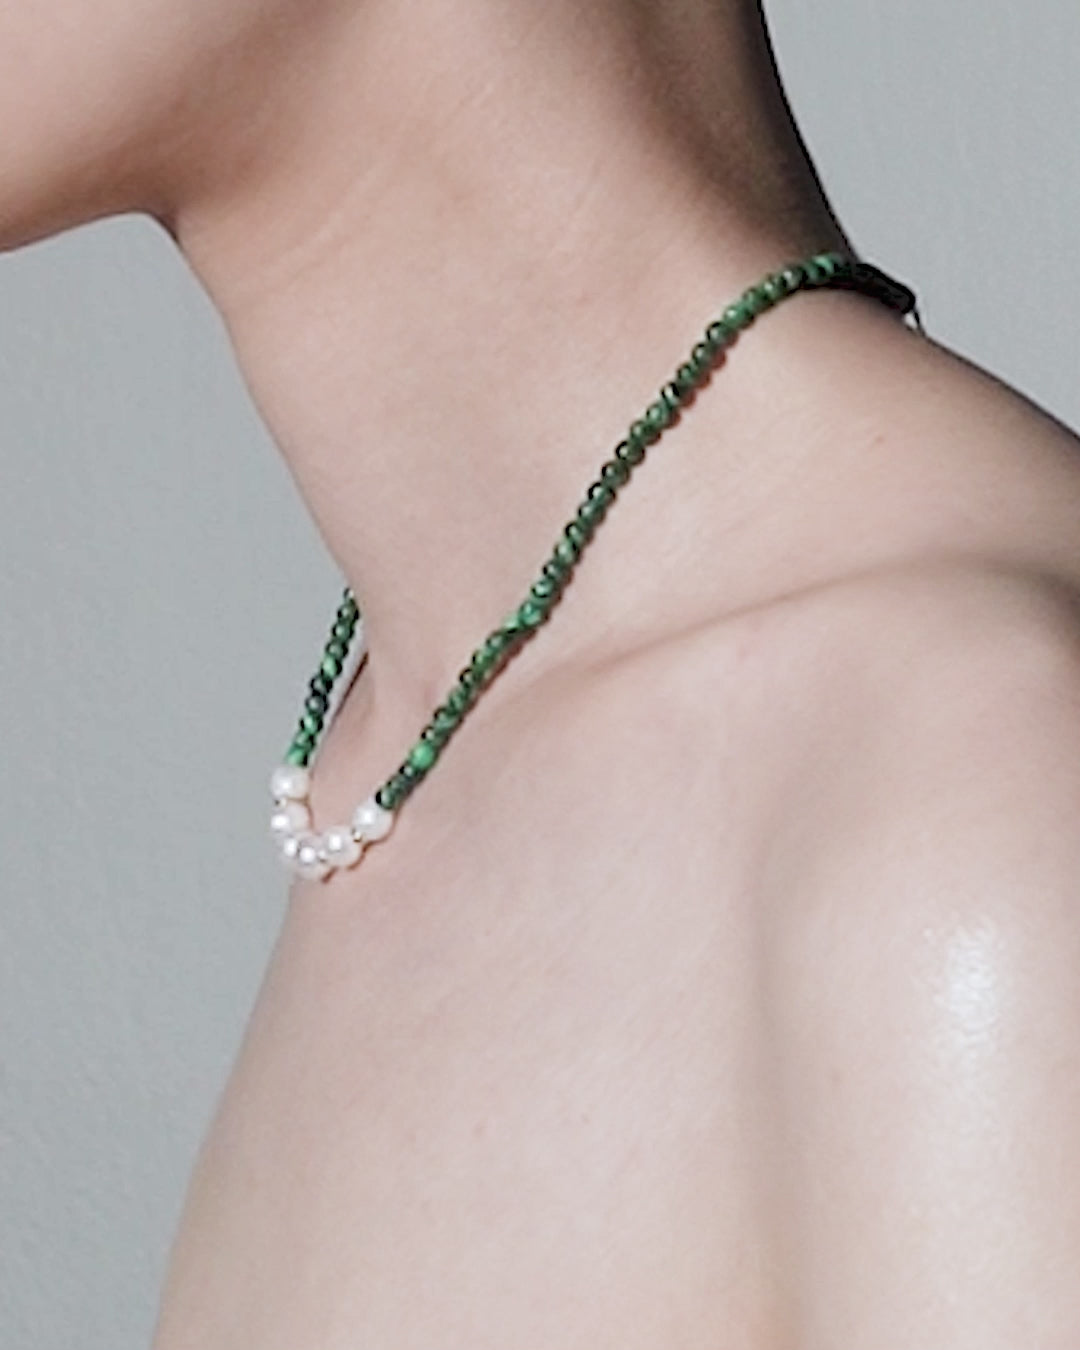 Sonora Green Glass and Freshwater Pearls with Gold Metal Beads Necklace Choker Juxtaposition Studio Seoul Korea